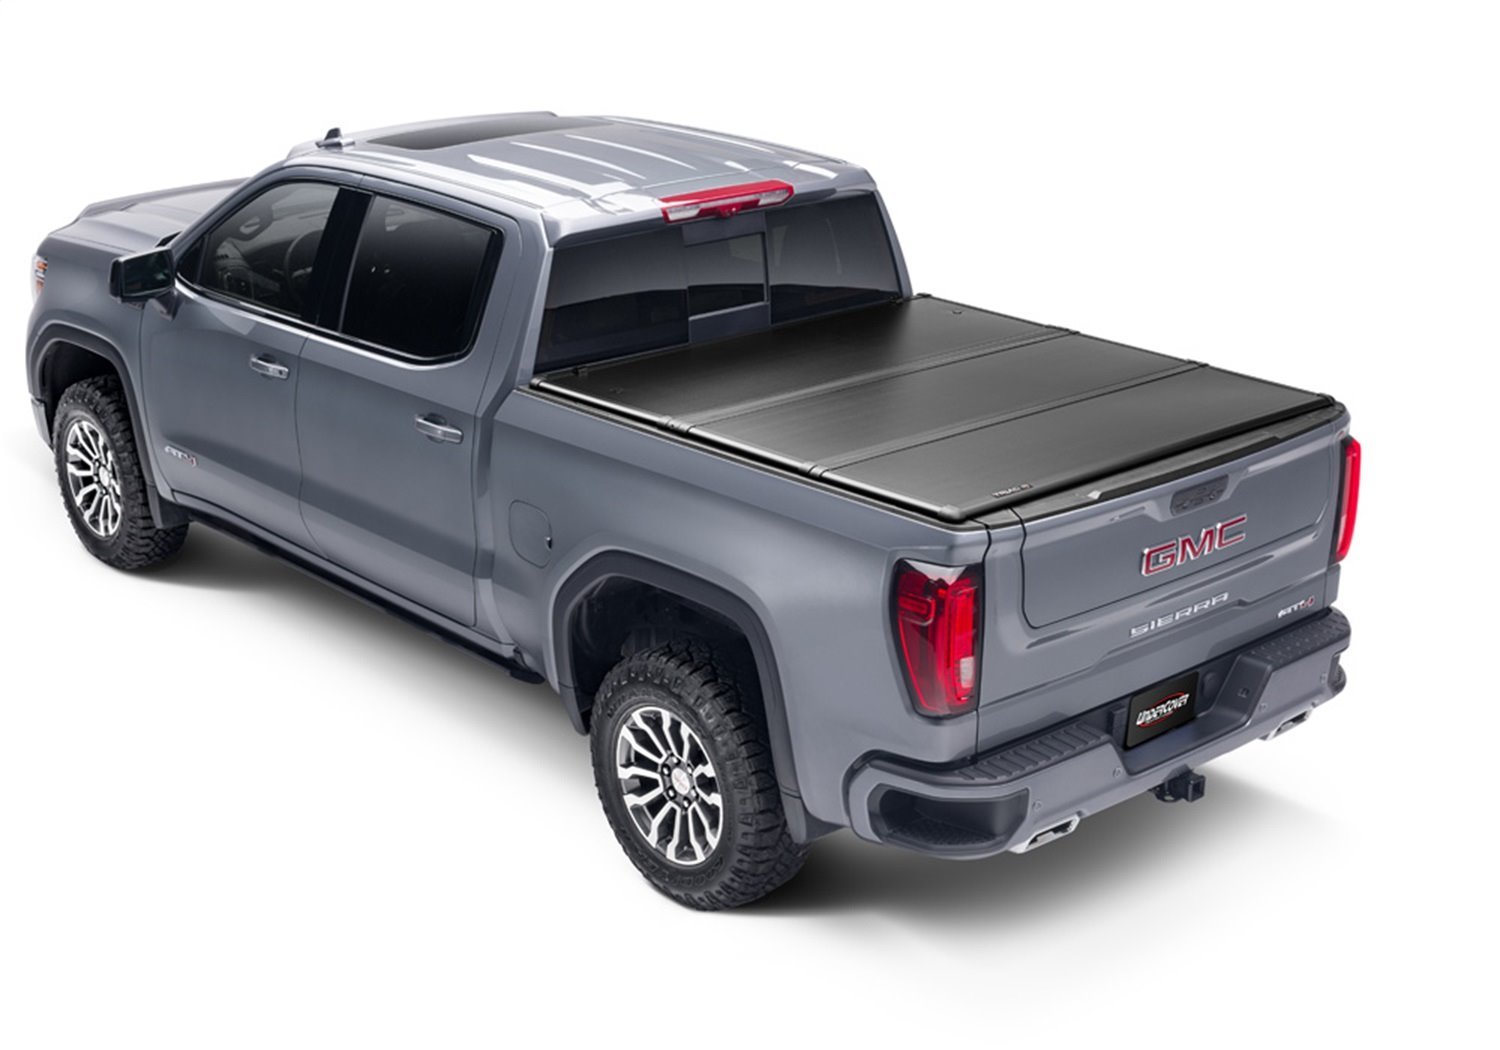 TR46014 Triad Hard Folding Cover, Fits Select Toyota Tacoma 5'Bed